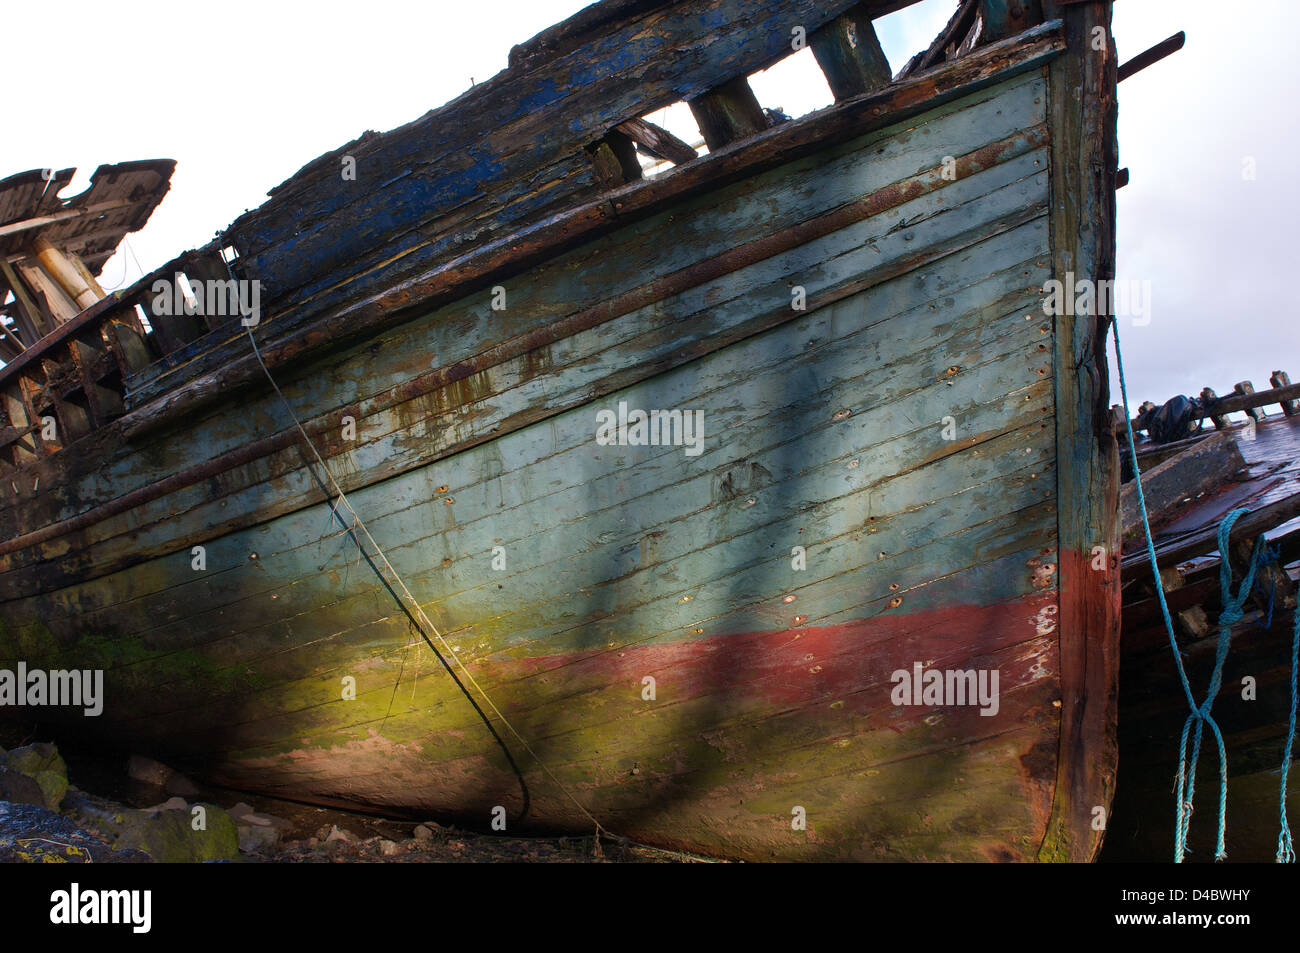 Rotting Boat Hull with colorful paint Stock Photo